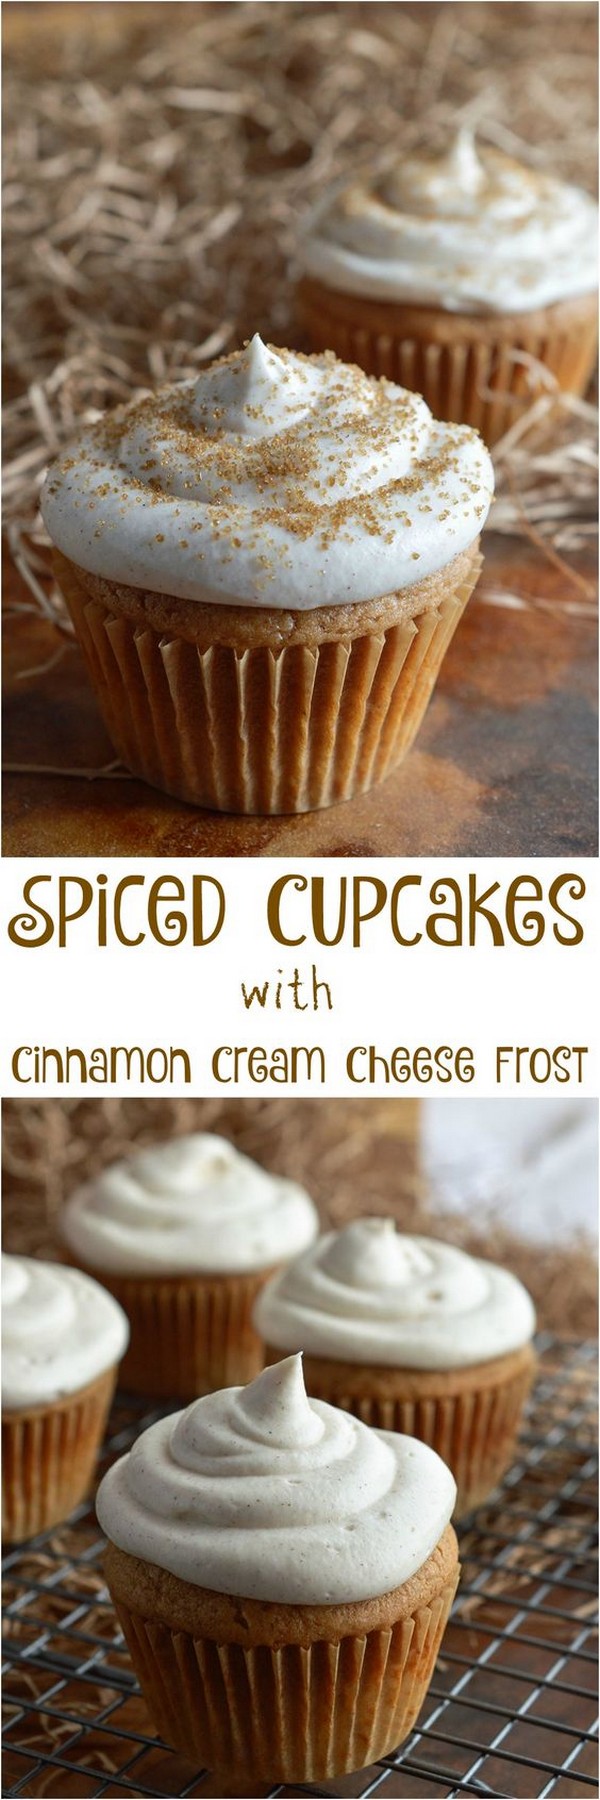 Spiced Cupcakes With Cinnamon Cream Cheese Frosting